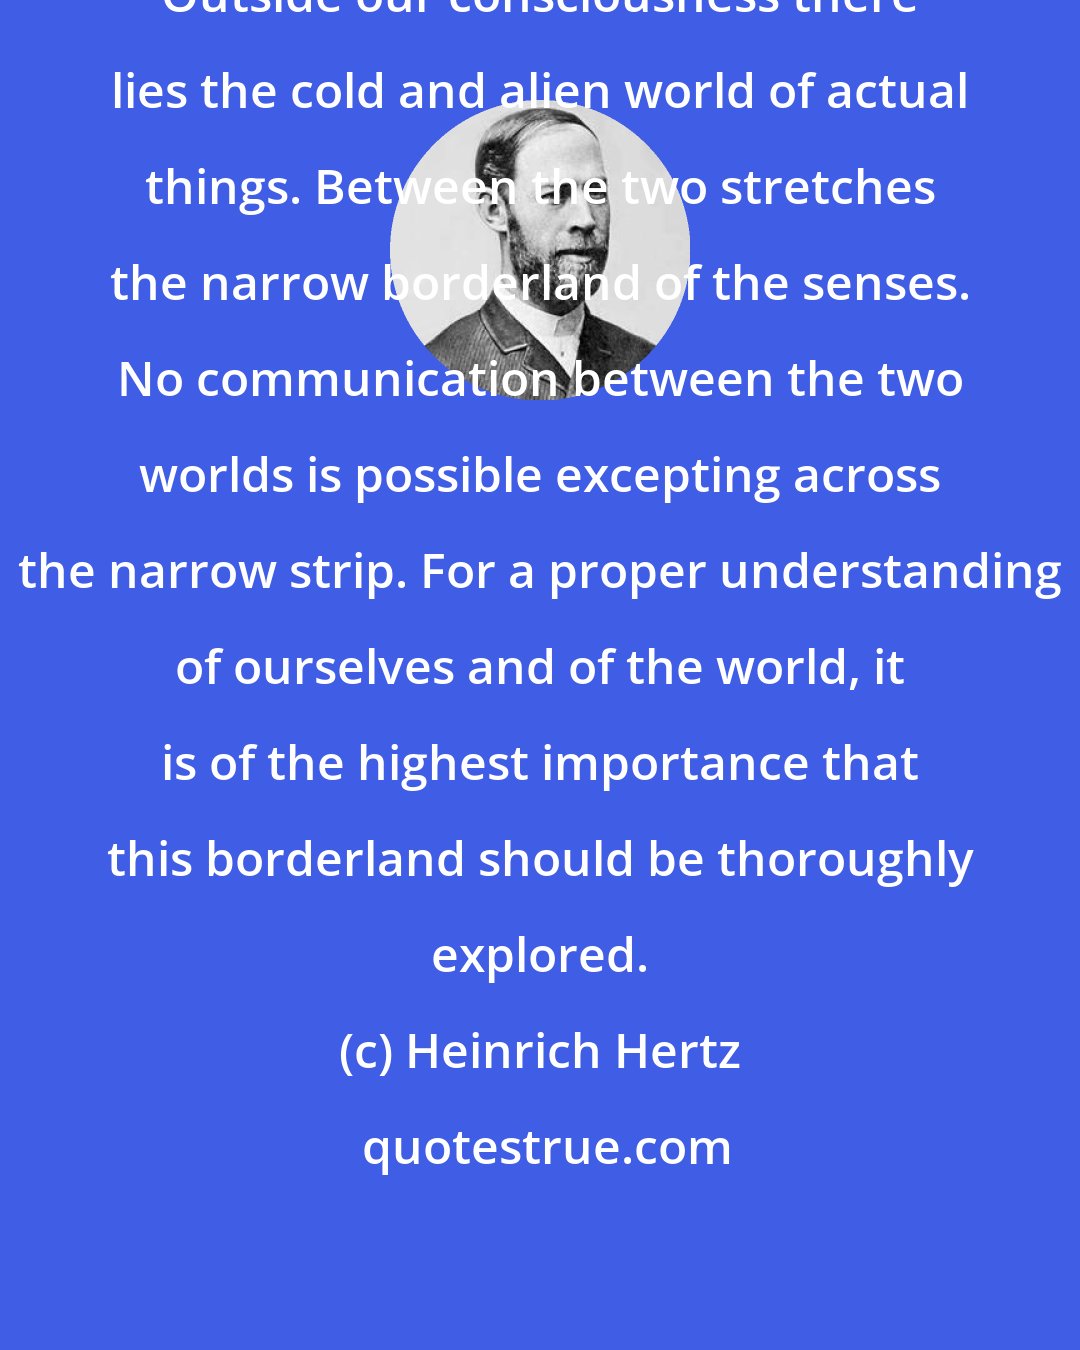 Heinrich Hertz: Outside our consciousness there lies the cold and alien world of actual things. Between the two stretches the narrow borderland of the senses. No communication between the two worlds is possible excepting across the narrow strip. For a proper understanding of ourselves and of the world, it is of the highest importance that this borderland should be thoroughly explored.